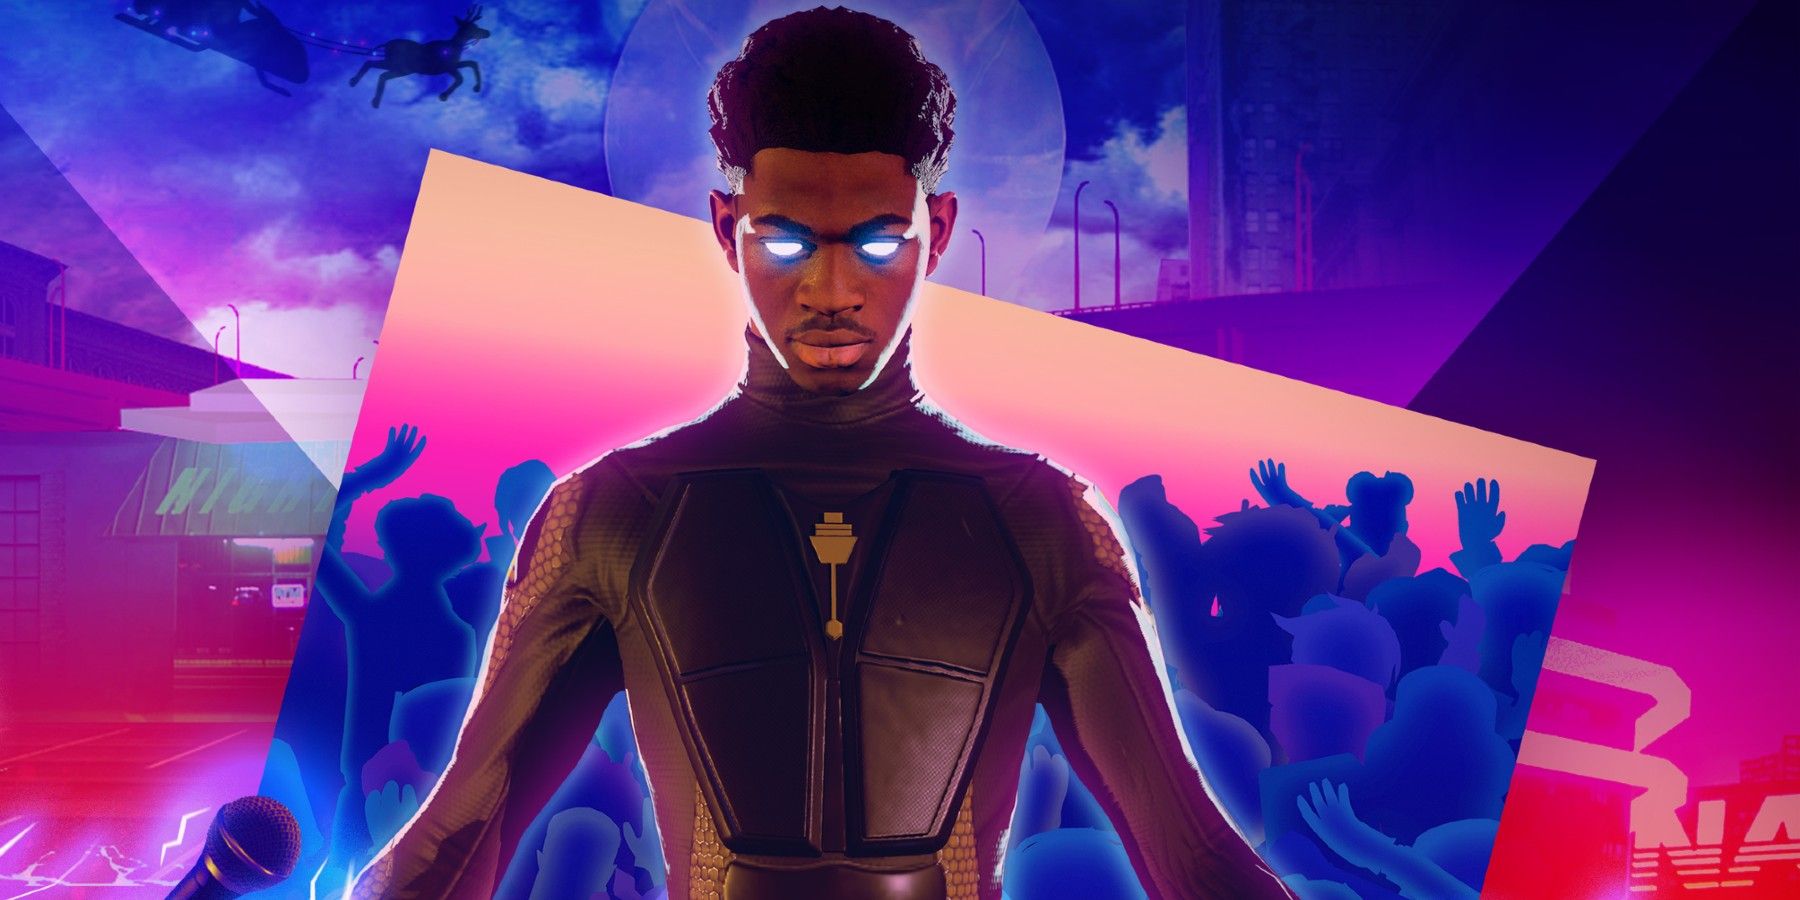 Roblox Books Lil Nas X For Fortnite Style In Game Concert Experience - roblox fortnite avatar